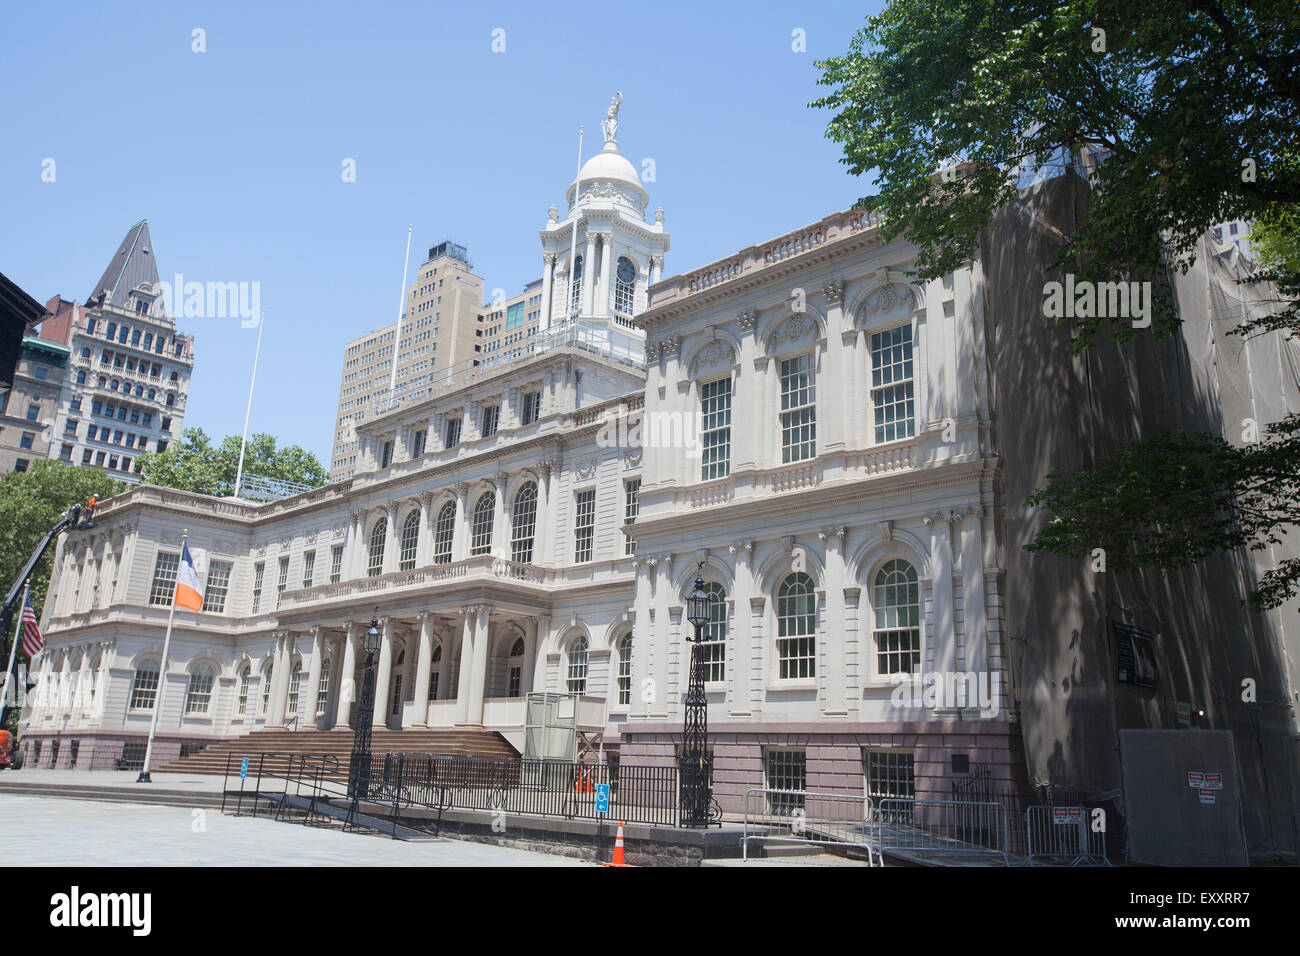 NEW YORK - May 30, 2015: New York City Hall is located at the center of City Hall Park in the Civic Center area of Lower Manhatt Stock Photo